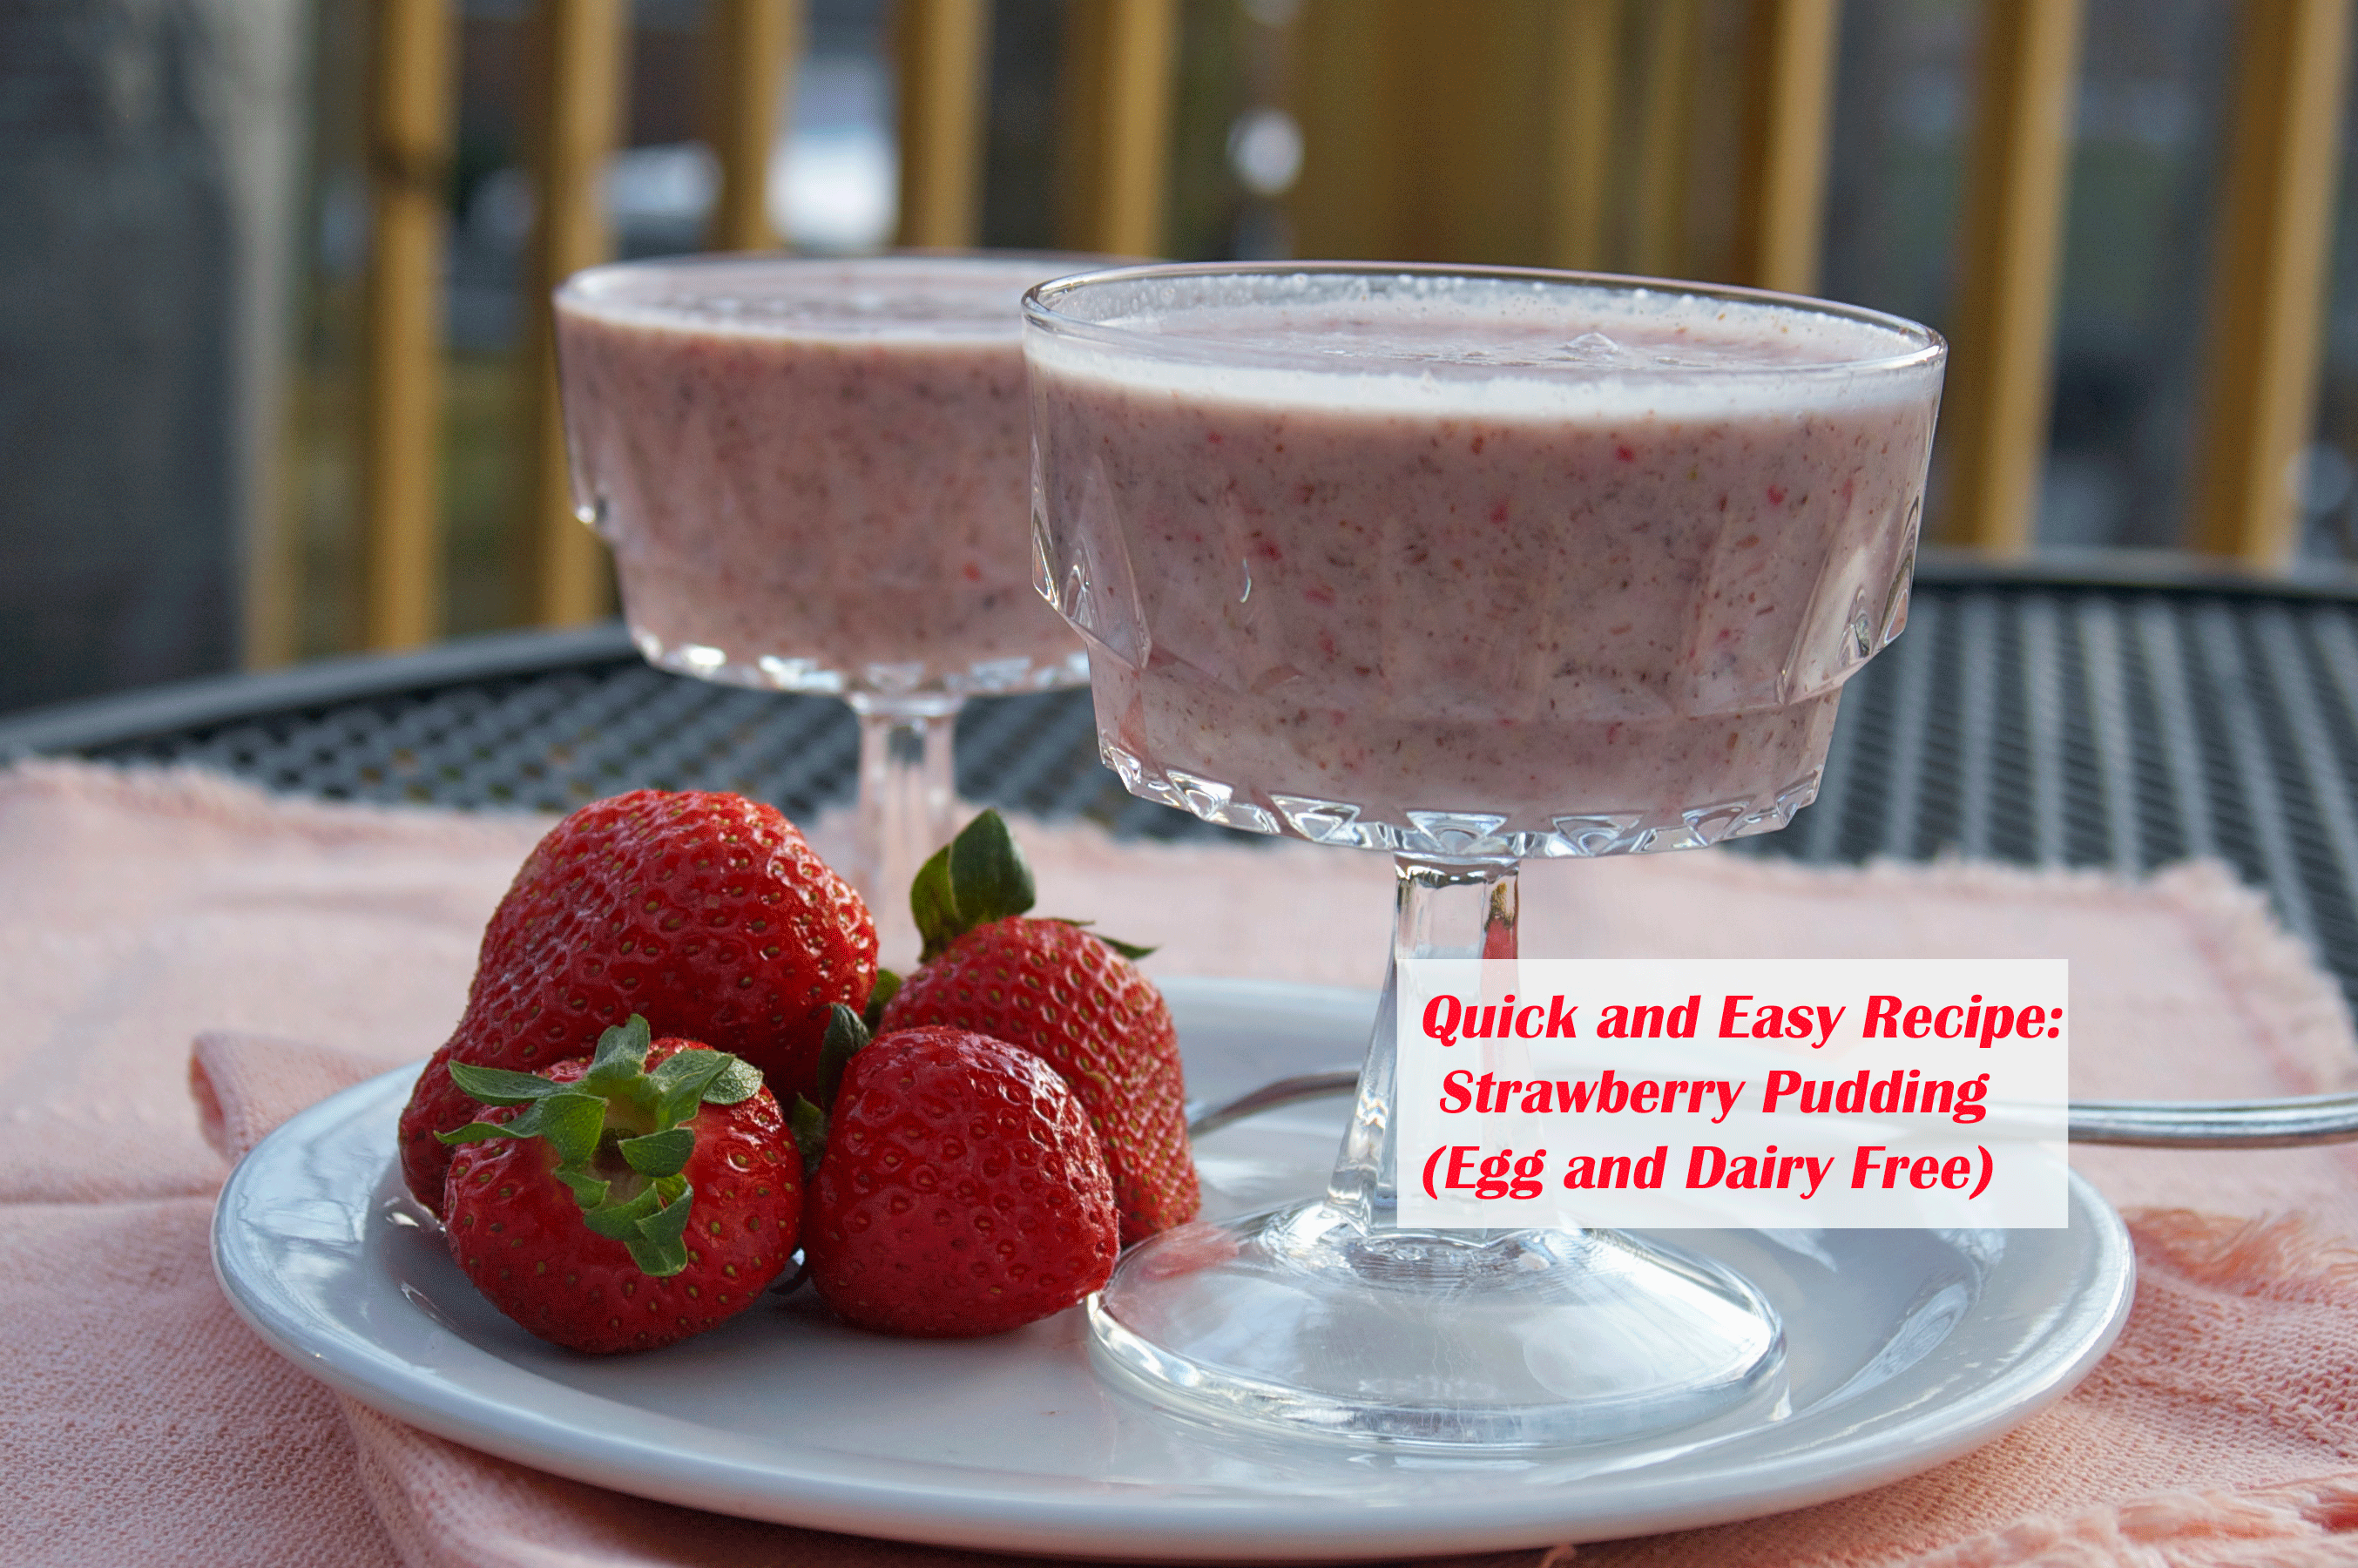 Easy Egg and Dairy Free Strawberry Pudding